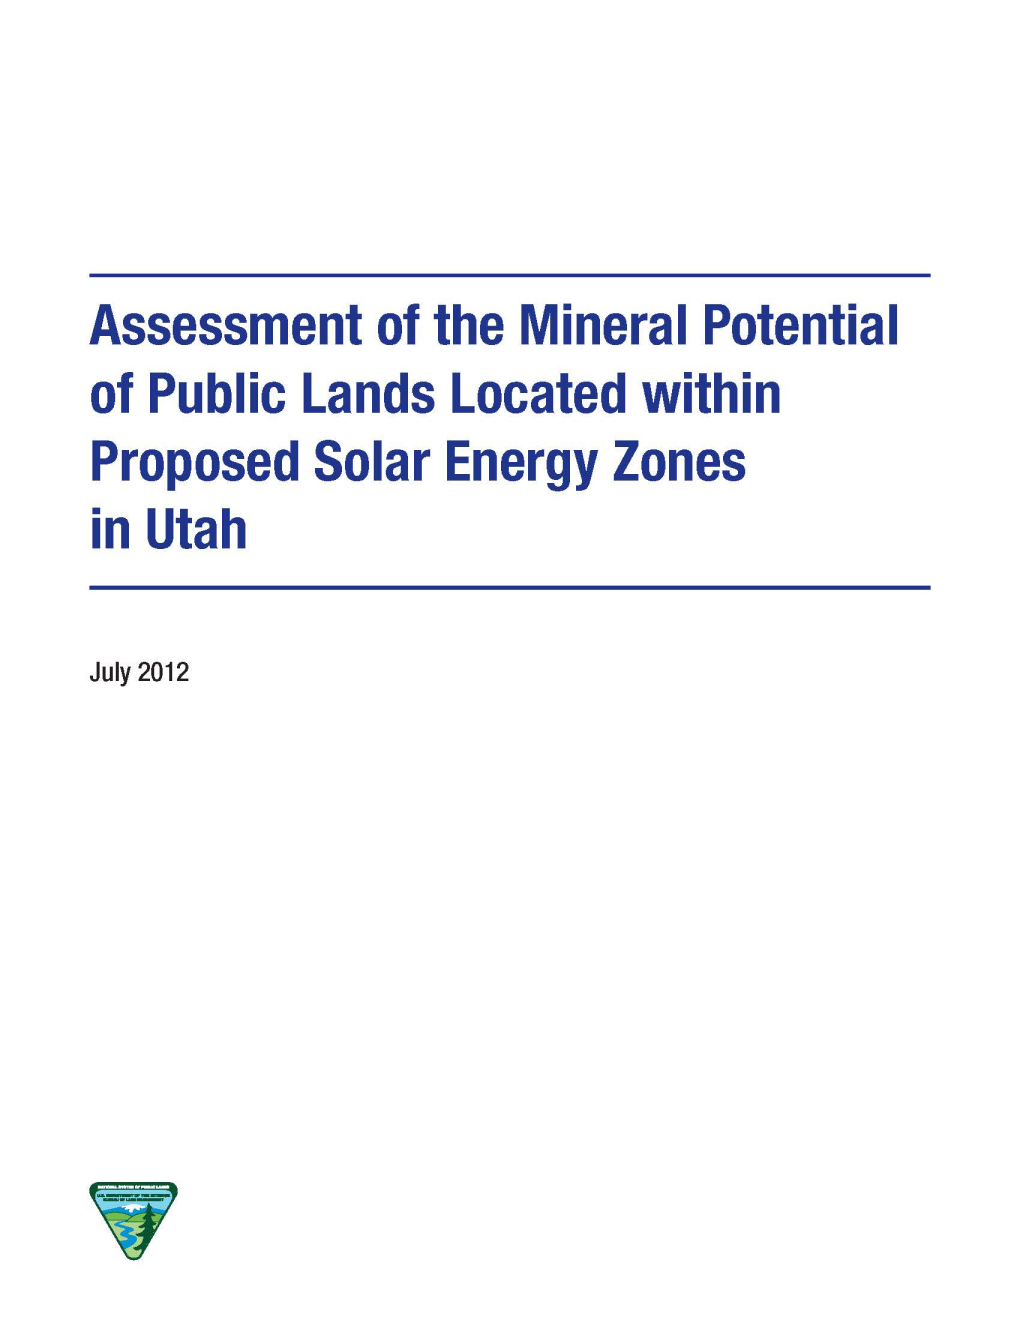 Assessment of the Mineral Potential of Public Lands Located Within Proposed Solar Energy Zones in Utah